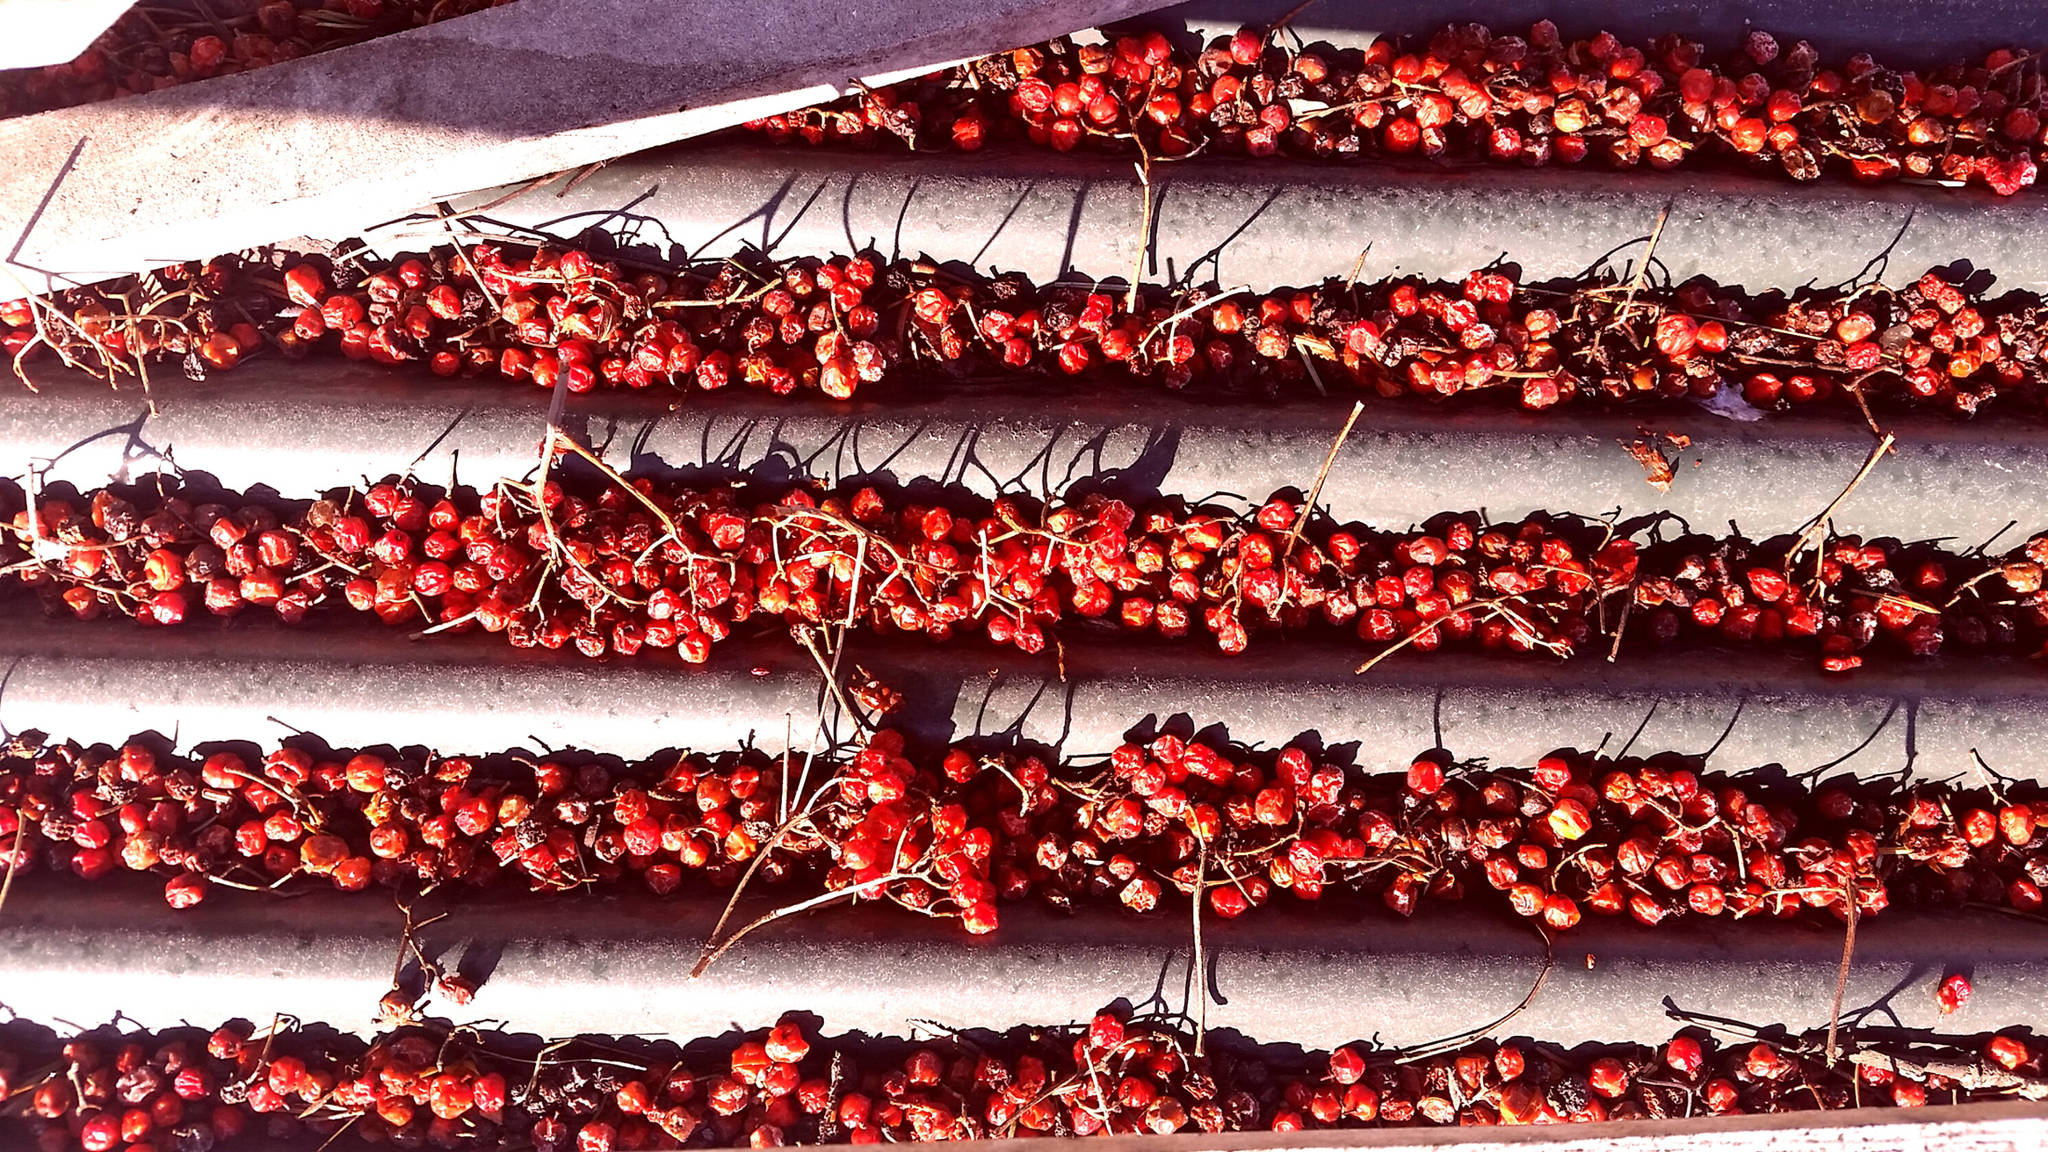 Mountain ashberries that dropped into the grooves of a sheet of corrugated iron. Photo by Vanessa Sinclair.